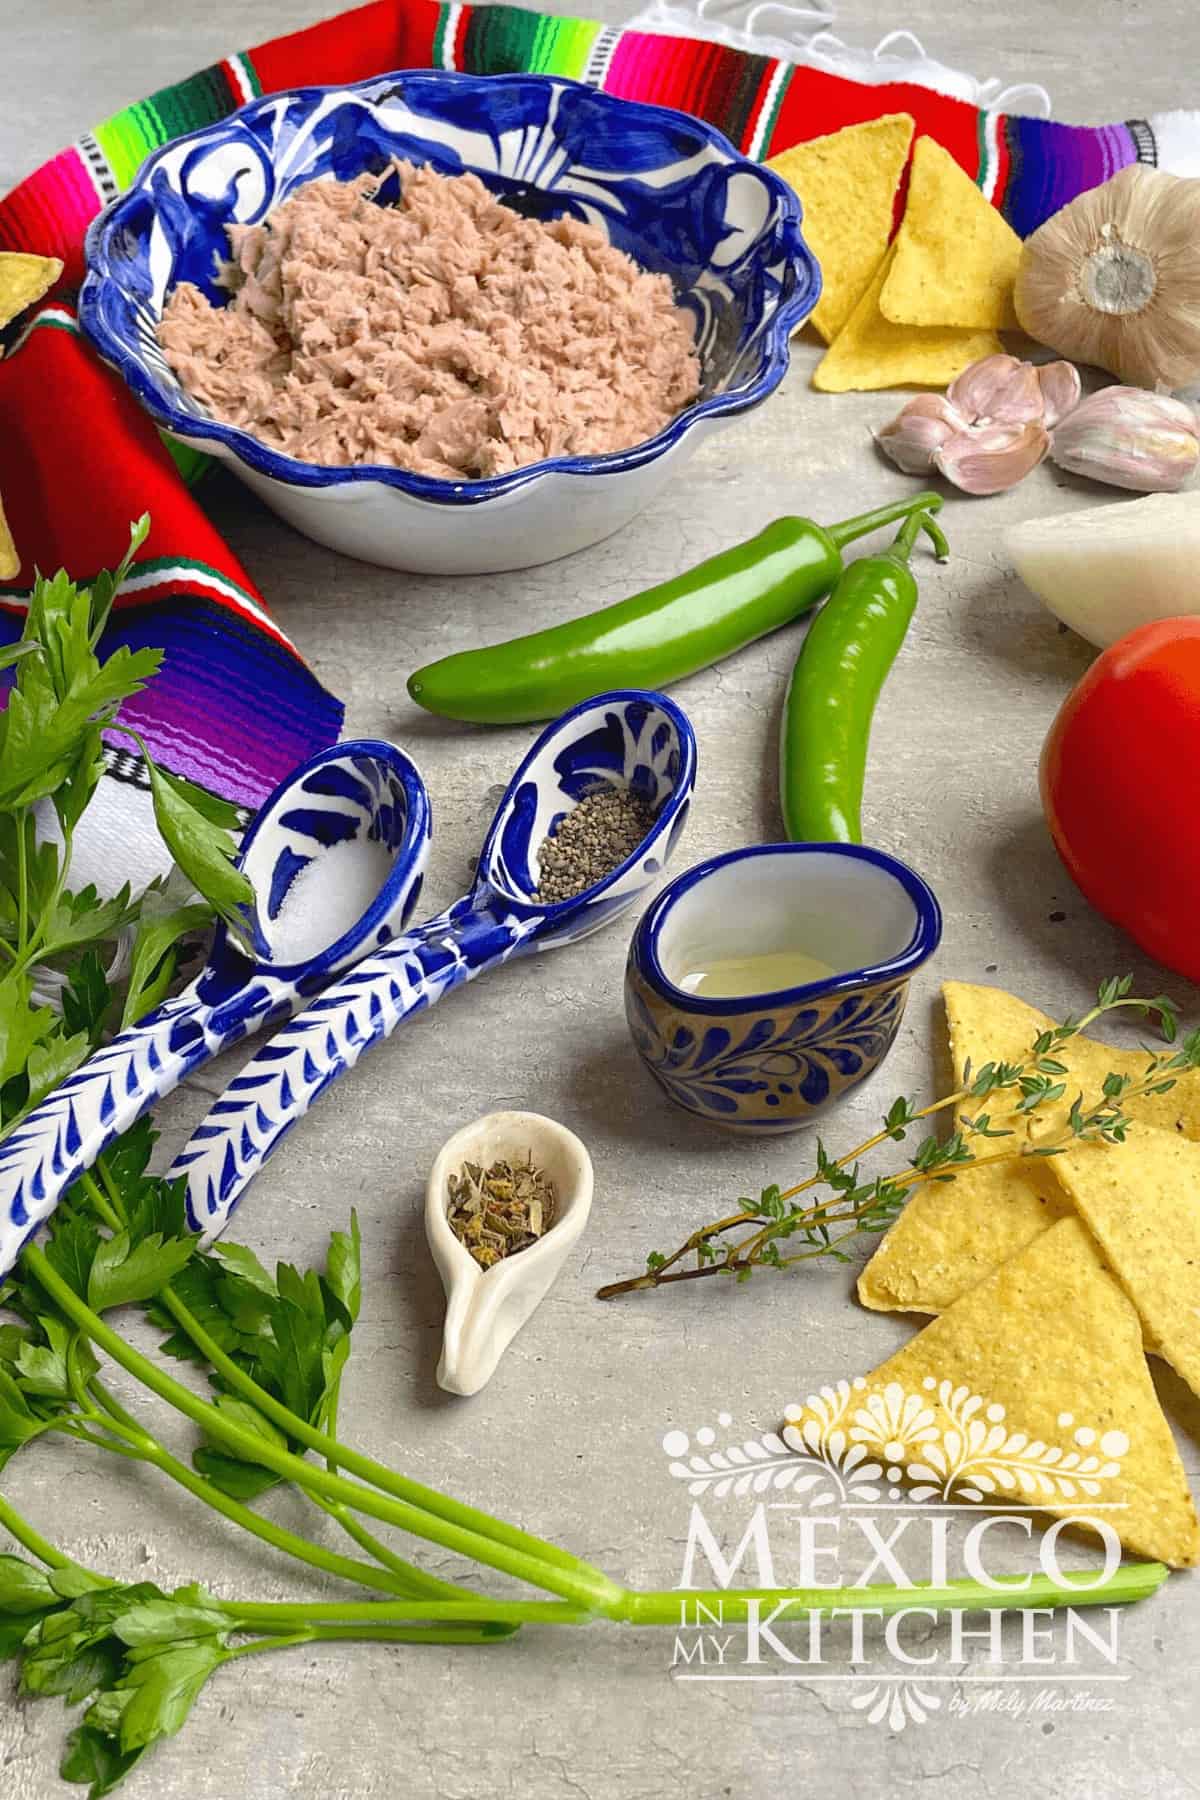 Display of ingredients like canned tuna, serrano peppers, parsley, garlic and spices.